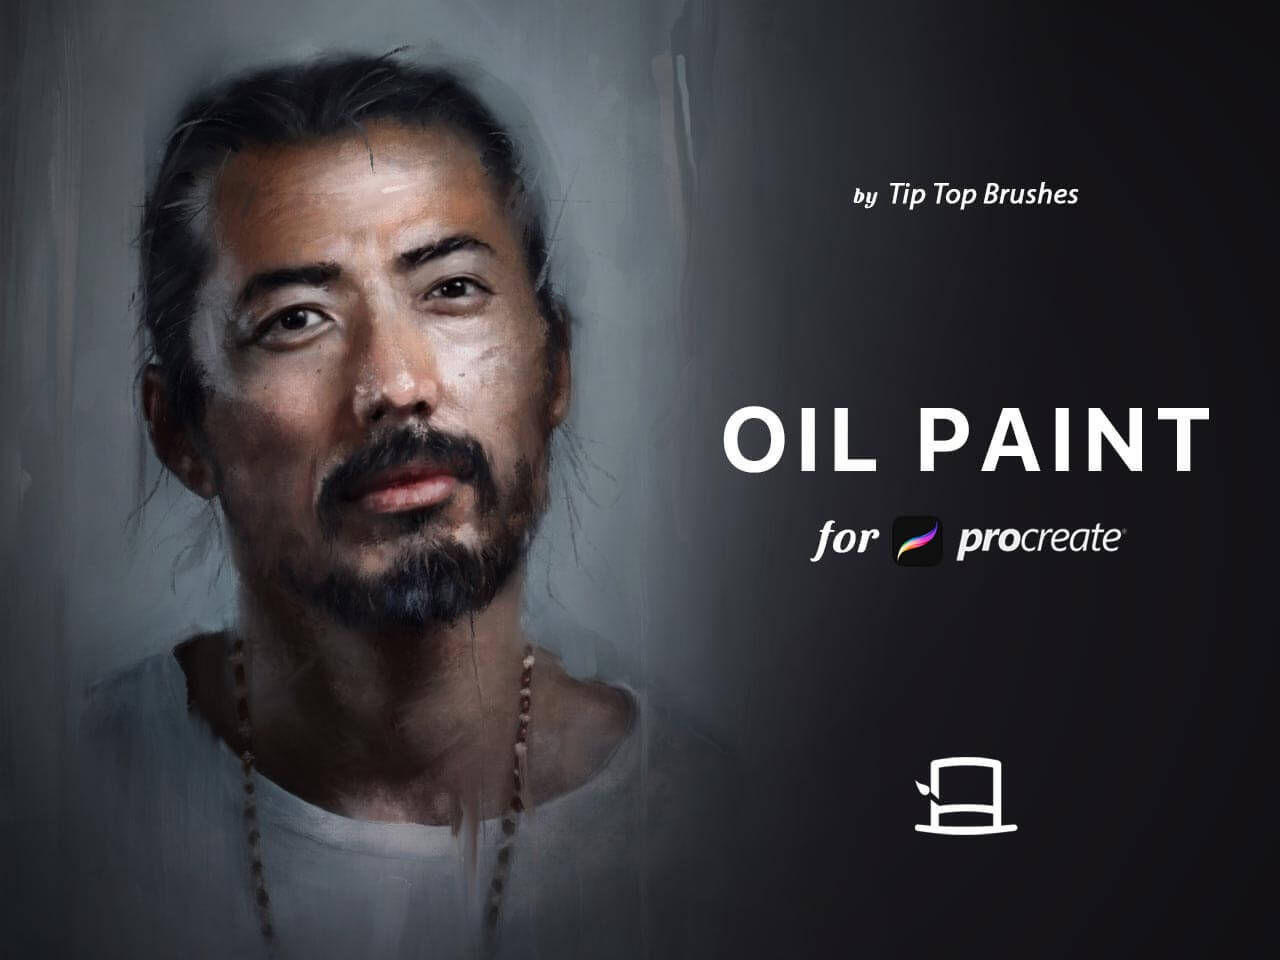 Free Oil Paint Brushes For Procreate by Tip Top Brushes | Watercolor